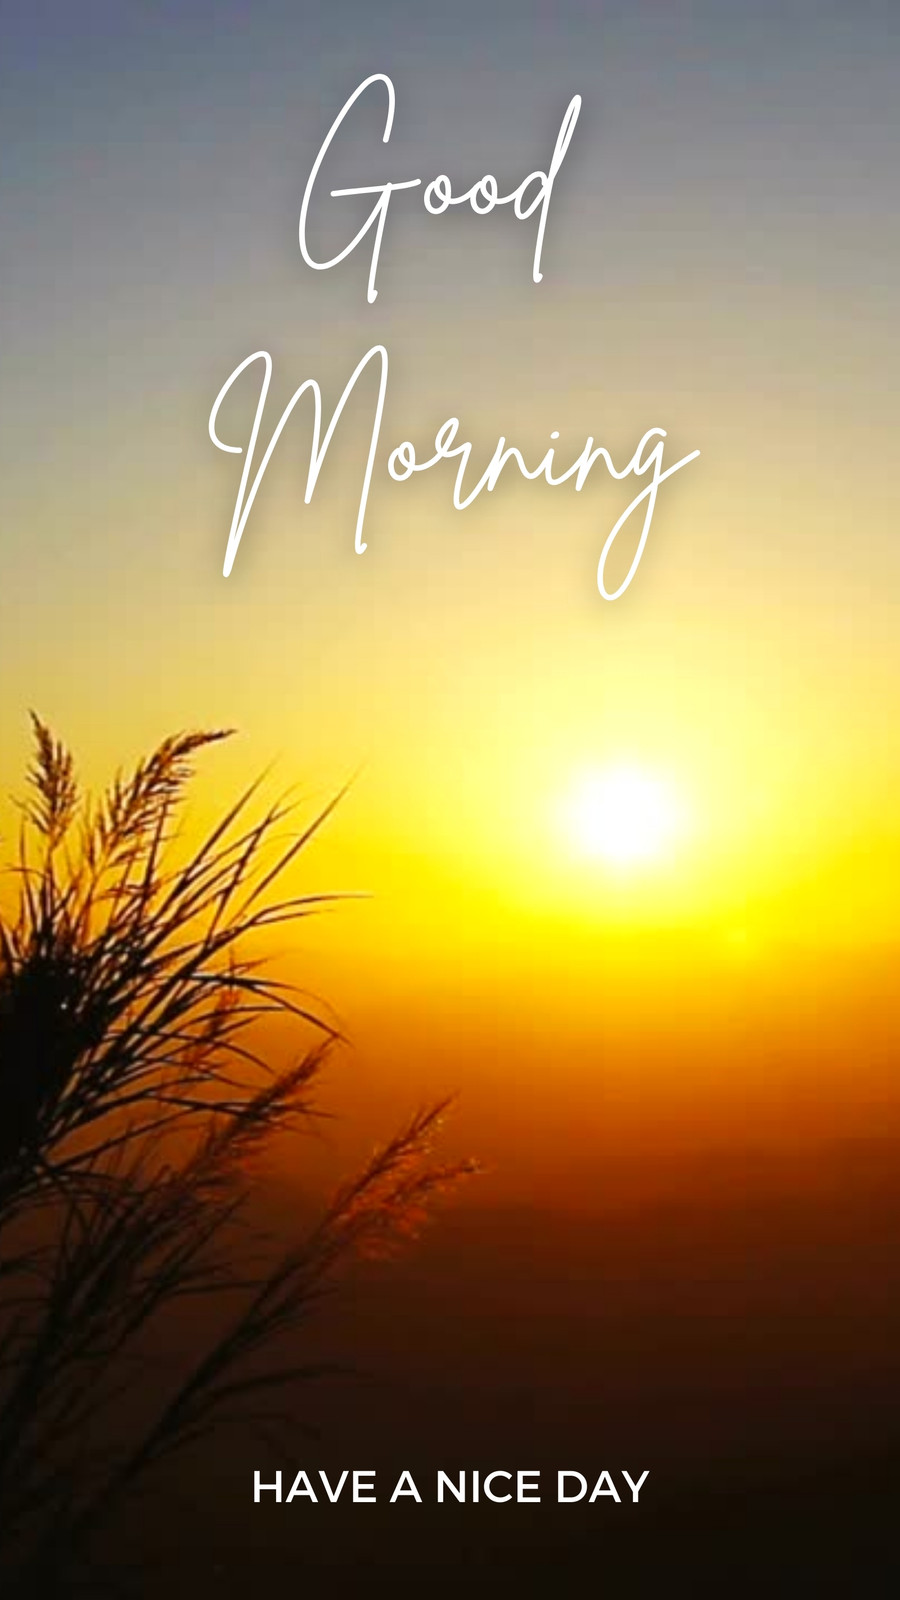 Page 21 - Free and customizable sunrise templates